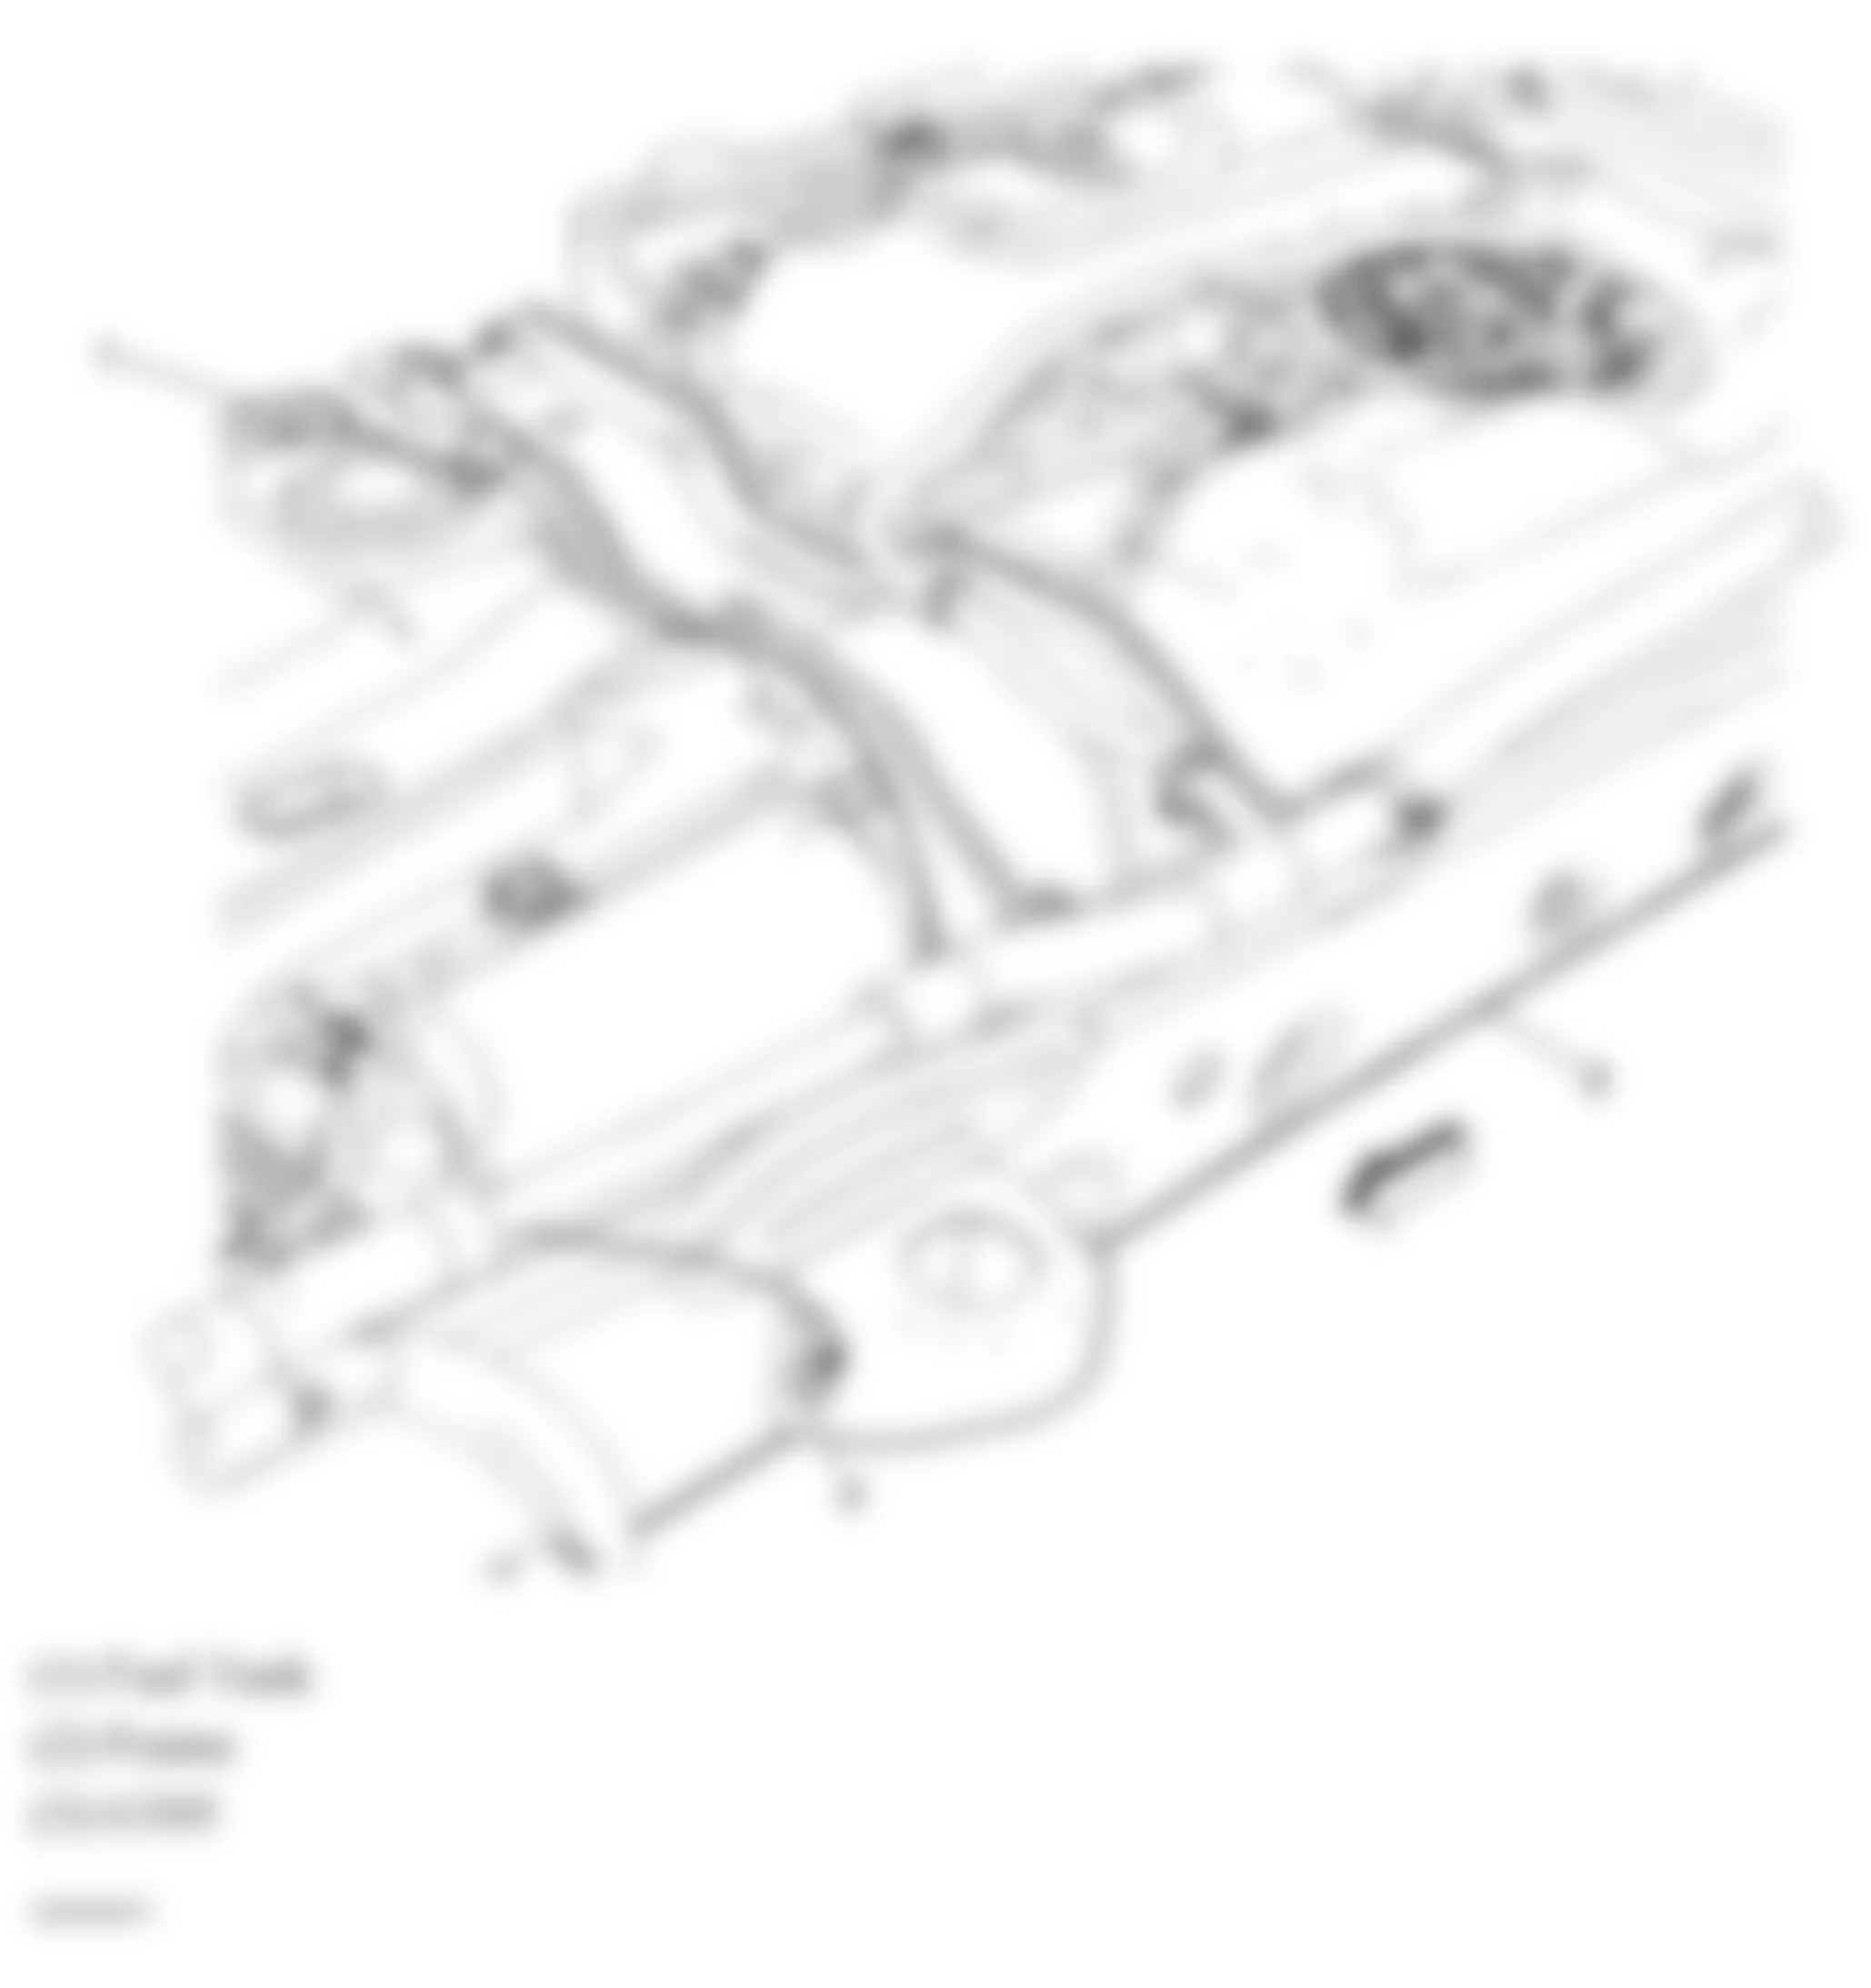 GMC Yukon XL K1500 2008 - Component Locations -  Rear Chassis